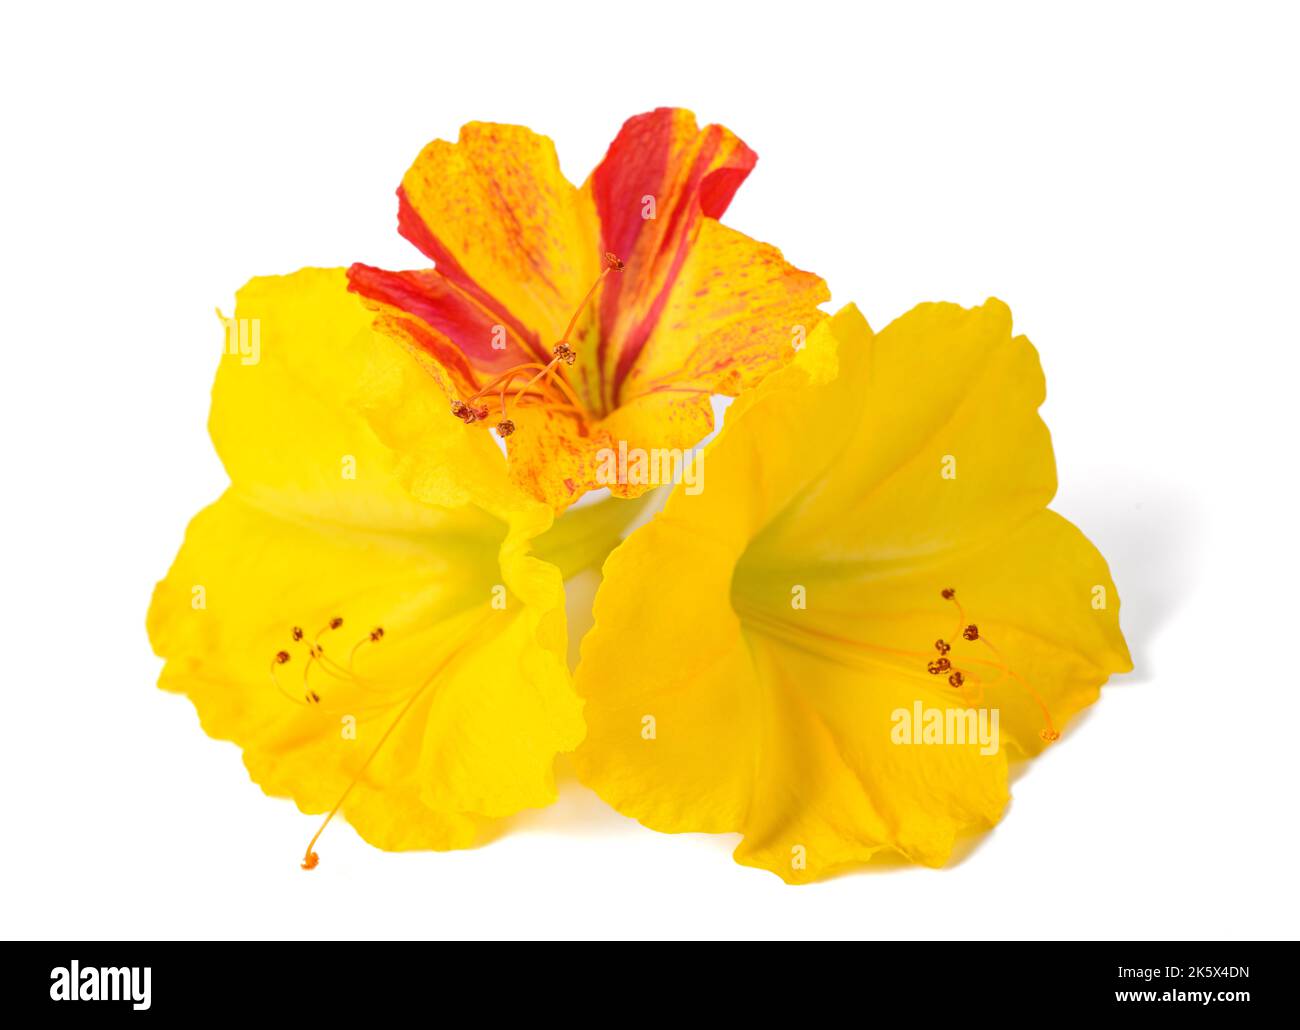 Yellow and red Four o'clock flowers isolated on white background Stock Photo